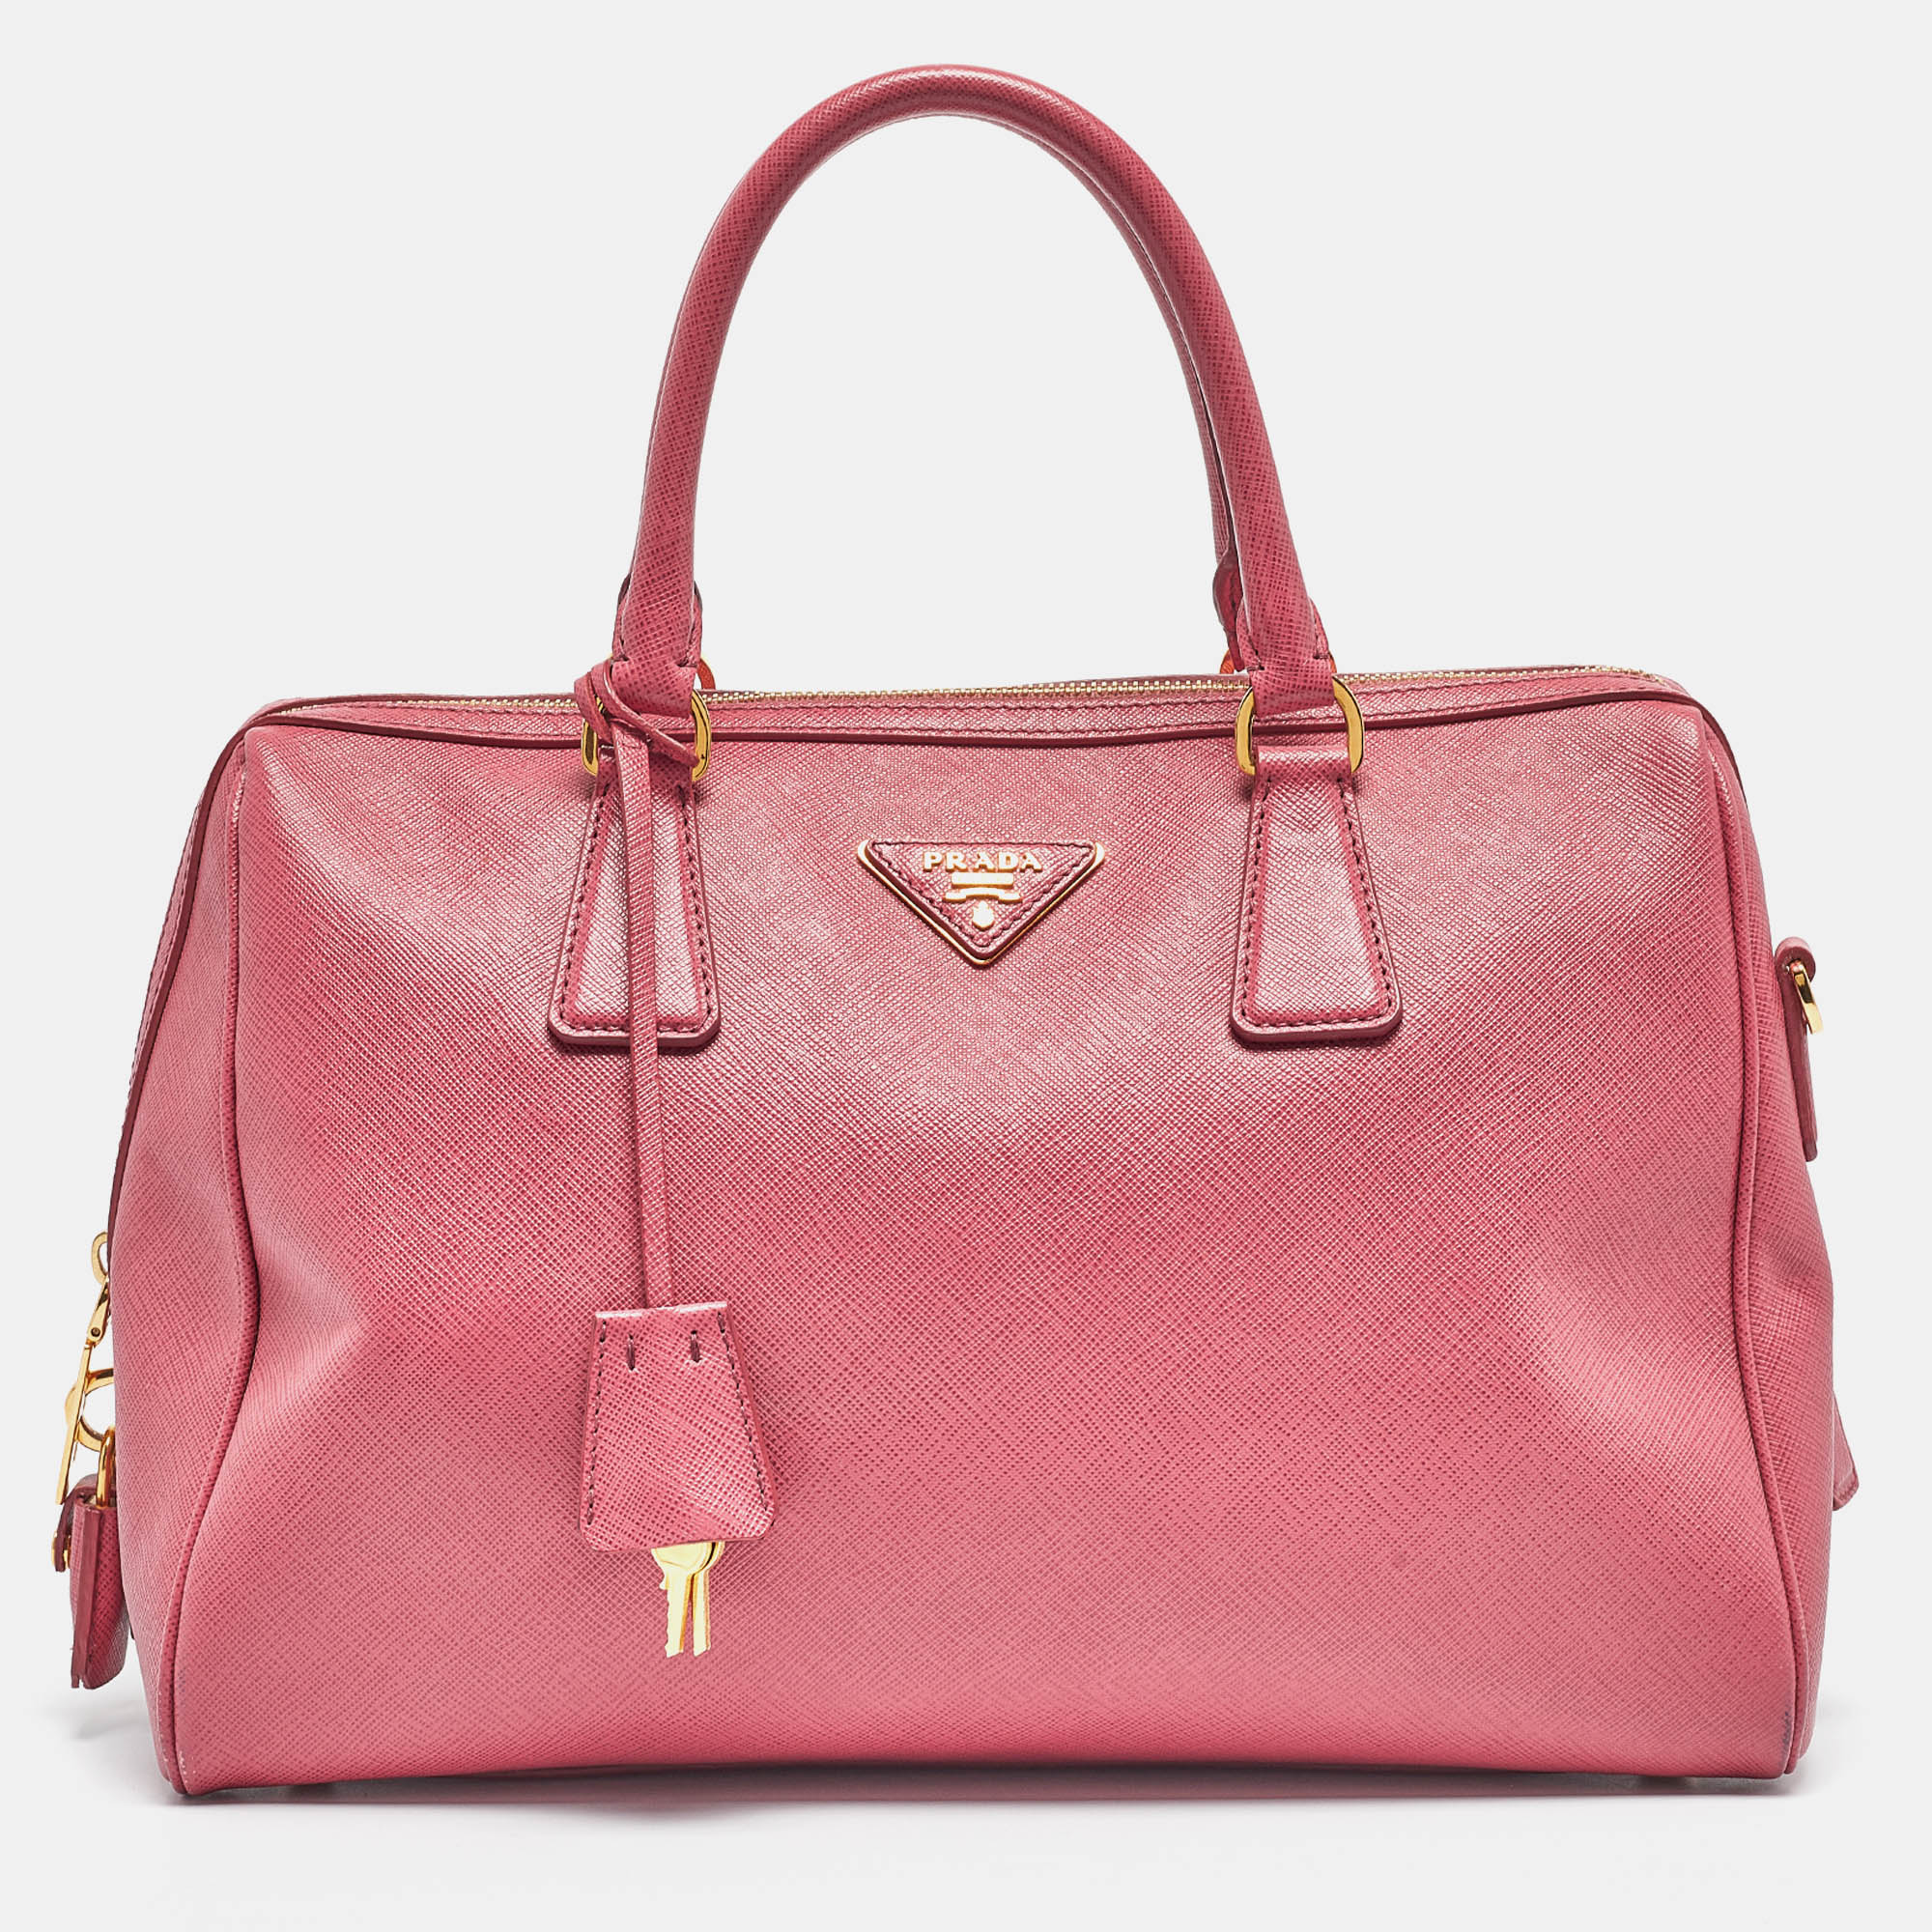 Pre-owned Prada Pink Saffiano Lux Leather Bowler Bag